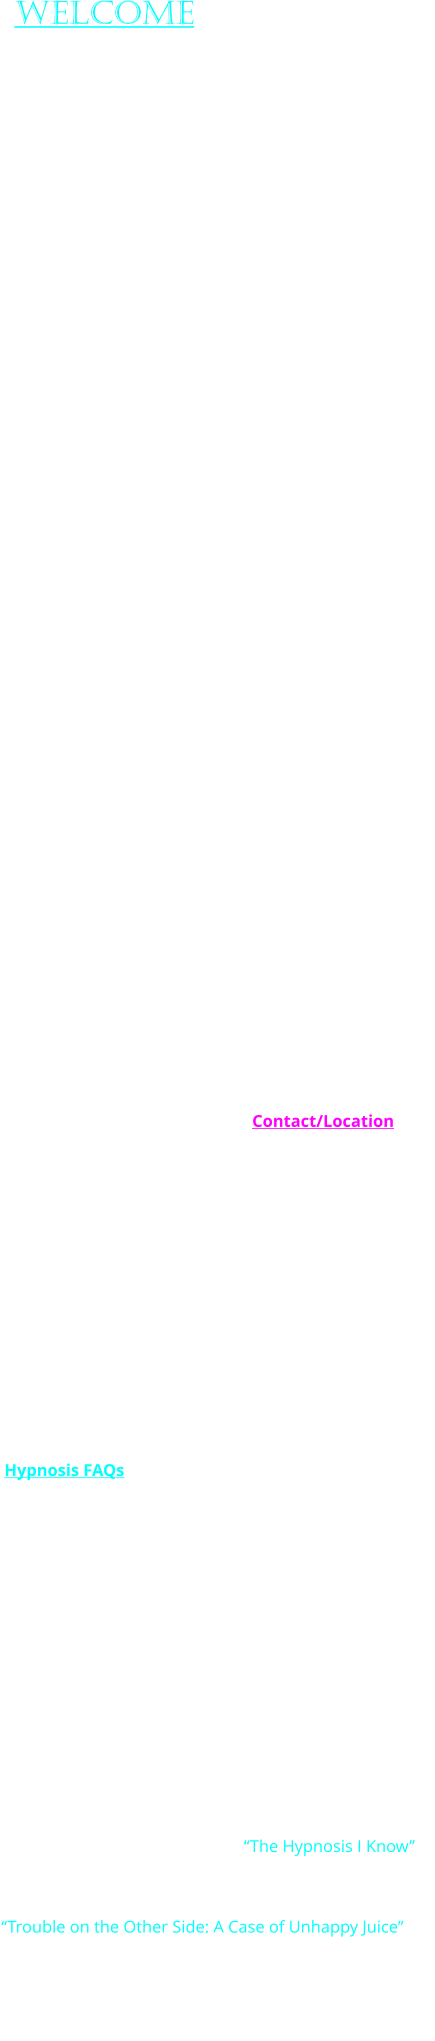 Welcome   Mind Over Matter has been providing Hypnotherapy in the Detroit Metropolitan area of Oakland County Michigan for over 20 years.  Certified Hypnotherapist and author Dawn Wheeler, has harnessed and honed the tool of Hypnosis to help people transform virtually every aspect of their lives.  Her own uniquely comprehensive approach integrating body, mind, spirit and energy concepts, enables clients to achieve lasting change.  Changes can be experienced physically, mentally, emotionally, behaviorally and spiritually.               At Mind Over Matter Works, Hypnotherapy sessions are always  customized to meet individual needs.  All Hypnosis is conducted in a fully interactive manner to allow clients to gain critical insights and get to the root cause of issues to achieve their goals.  A variety of techniques, including regression therapy, are employed to help clients get the results they want.  The subconscious part of the mind knows why a person has difficulties and what is needed to change things.  All we need to do is ask.  During Hypnosis, the subconscious can guide us to understanding, healing and resolution without guess work.  Issues are addressed from every angle to insure lasting change.  Dawn also helps clients develop new habits and positive coping mechanisms, so as to avoid issues in the future.  Custom Self-Hypnosis recordings may be provided to reinforce new and positive behaviors, attitudes and coping mechansisms, and also aid healing. Please see Contact/Location page for important info regarding sessions.  Hypnotherapy / Hypnosis is a safe, natural & efficient way to change your life for the better.  It is also one of the most effective tools for getting the Law of Attraction to work in your favor, so you can experience more of what you desire.  Hypnosis can address a wide range of concerns including:  Stress, Anxiety,  Fear, Trauma, Depression, Guilt, Anger, Pain, Health Issues, Undesired Habits/Behaviors, Addiction, Confidence, Focus, Memory, Motivation, Success, Relationships, Sports Performance, Past Life/Lives Exploration and more.  See Hypnosis FAQs page for more details.  Mind Over Matter offers affordable pay-as-you-go pricing.  Payment plans are also available.  Please note, this type of therapy is not covered by insurance, so the cost will be generally be out of pocket.  However, most clients are able to get reimbursement from pretax health savings accounts when applicable.  Dawn Wheeler is a certified member of the International Medical and Dental Hypnotherapy Association (IMDHA).    Dawn is the author of the book “The Hypnosis I Know”, a wonderful glimpse into the powerful healing potential of the body mind connection.  She is also the author of “Trouble on the Other Side: A Case of Unhappy Juice”, a spiritual perspective of the human experience and entertaining, thought provoking glimpse into the afterlife, all wrapped up in a mystery that puts Earth's future at stake.